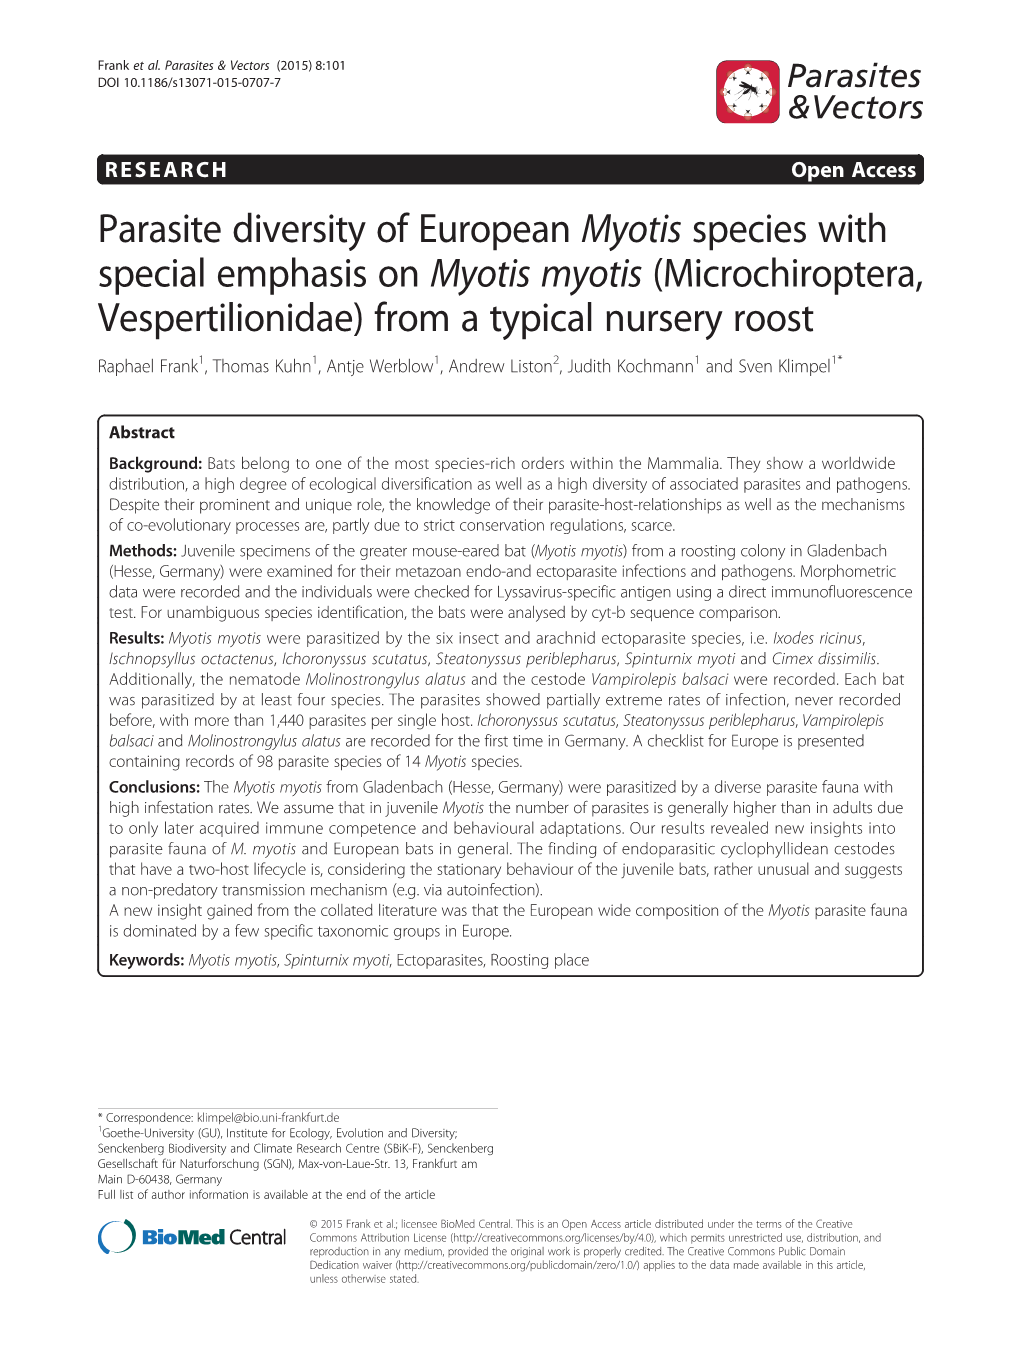 Parasite Diversity of European Myotis Species with Special Emphasis On